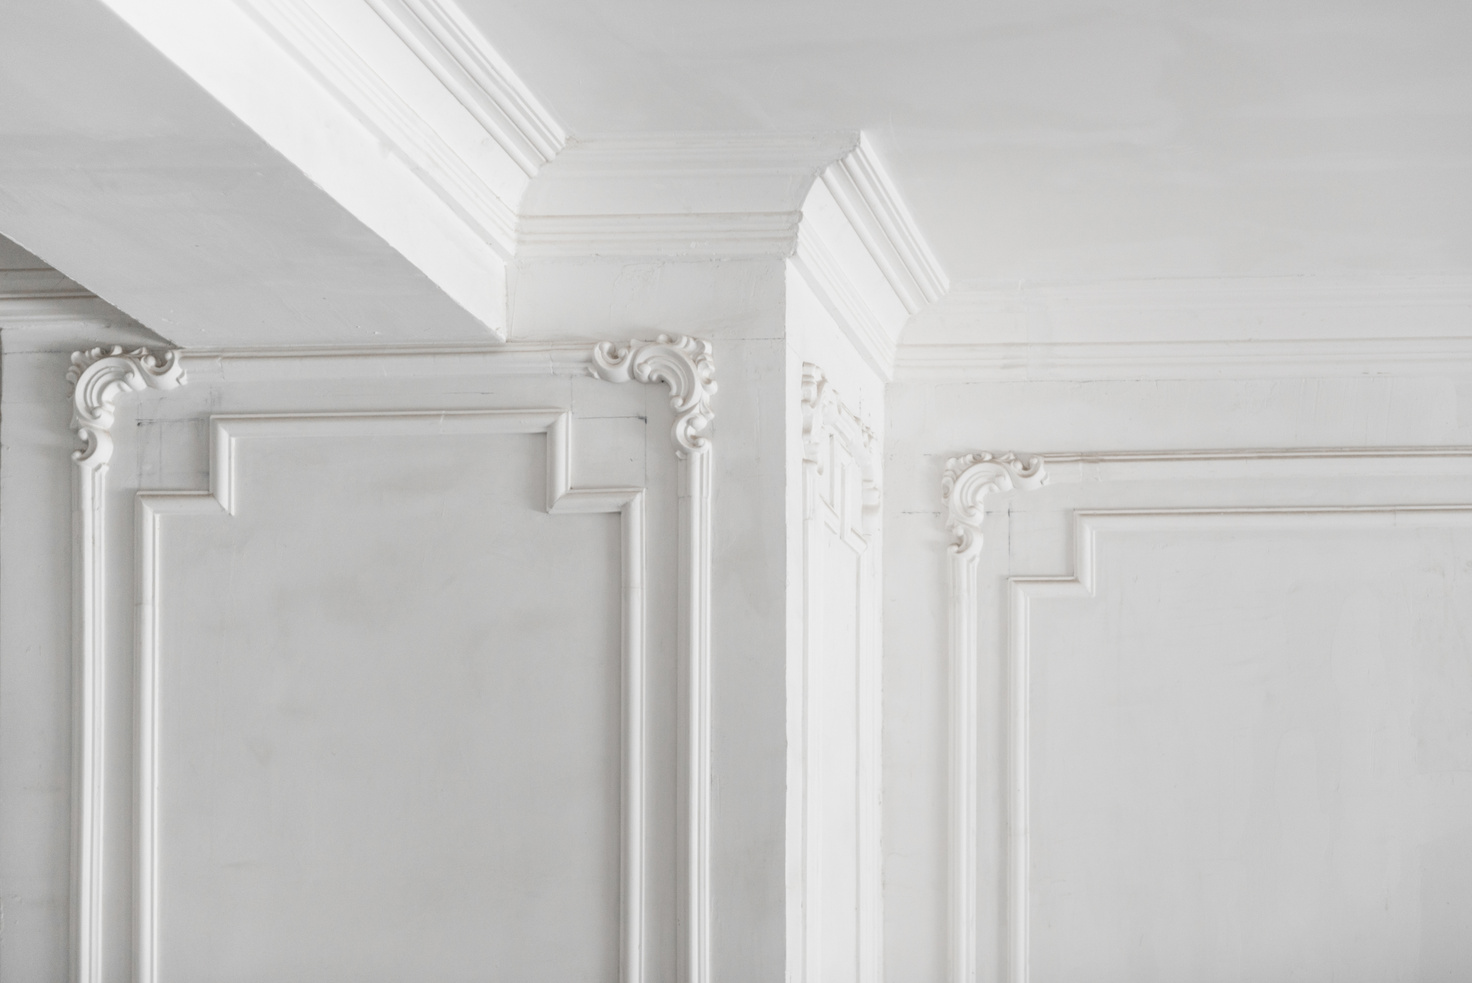 plaster molding in the room